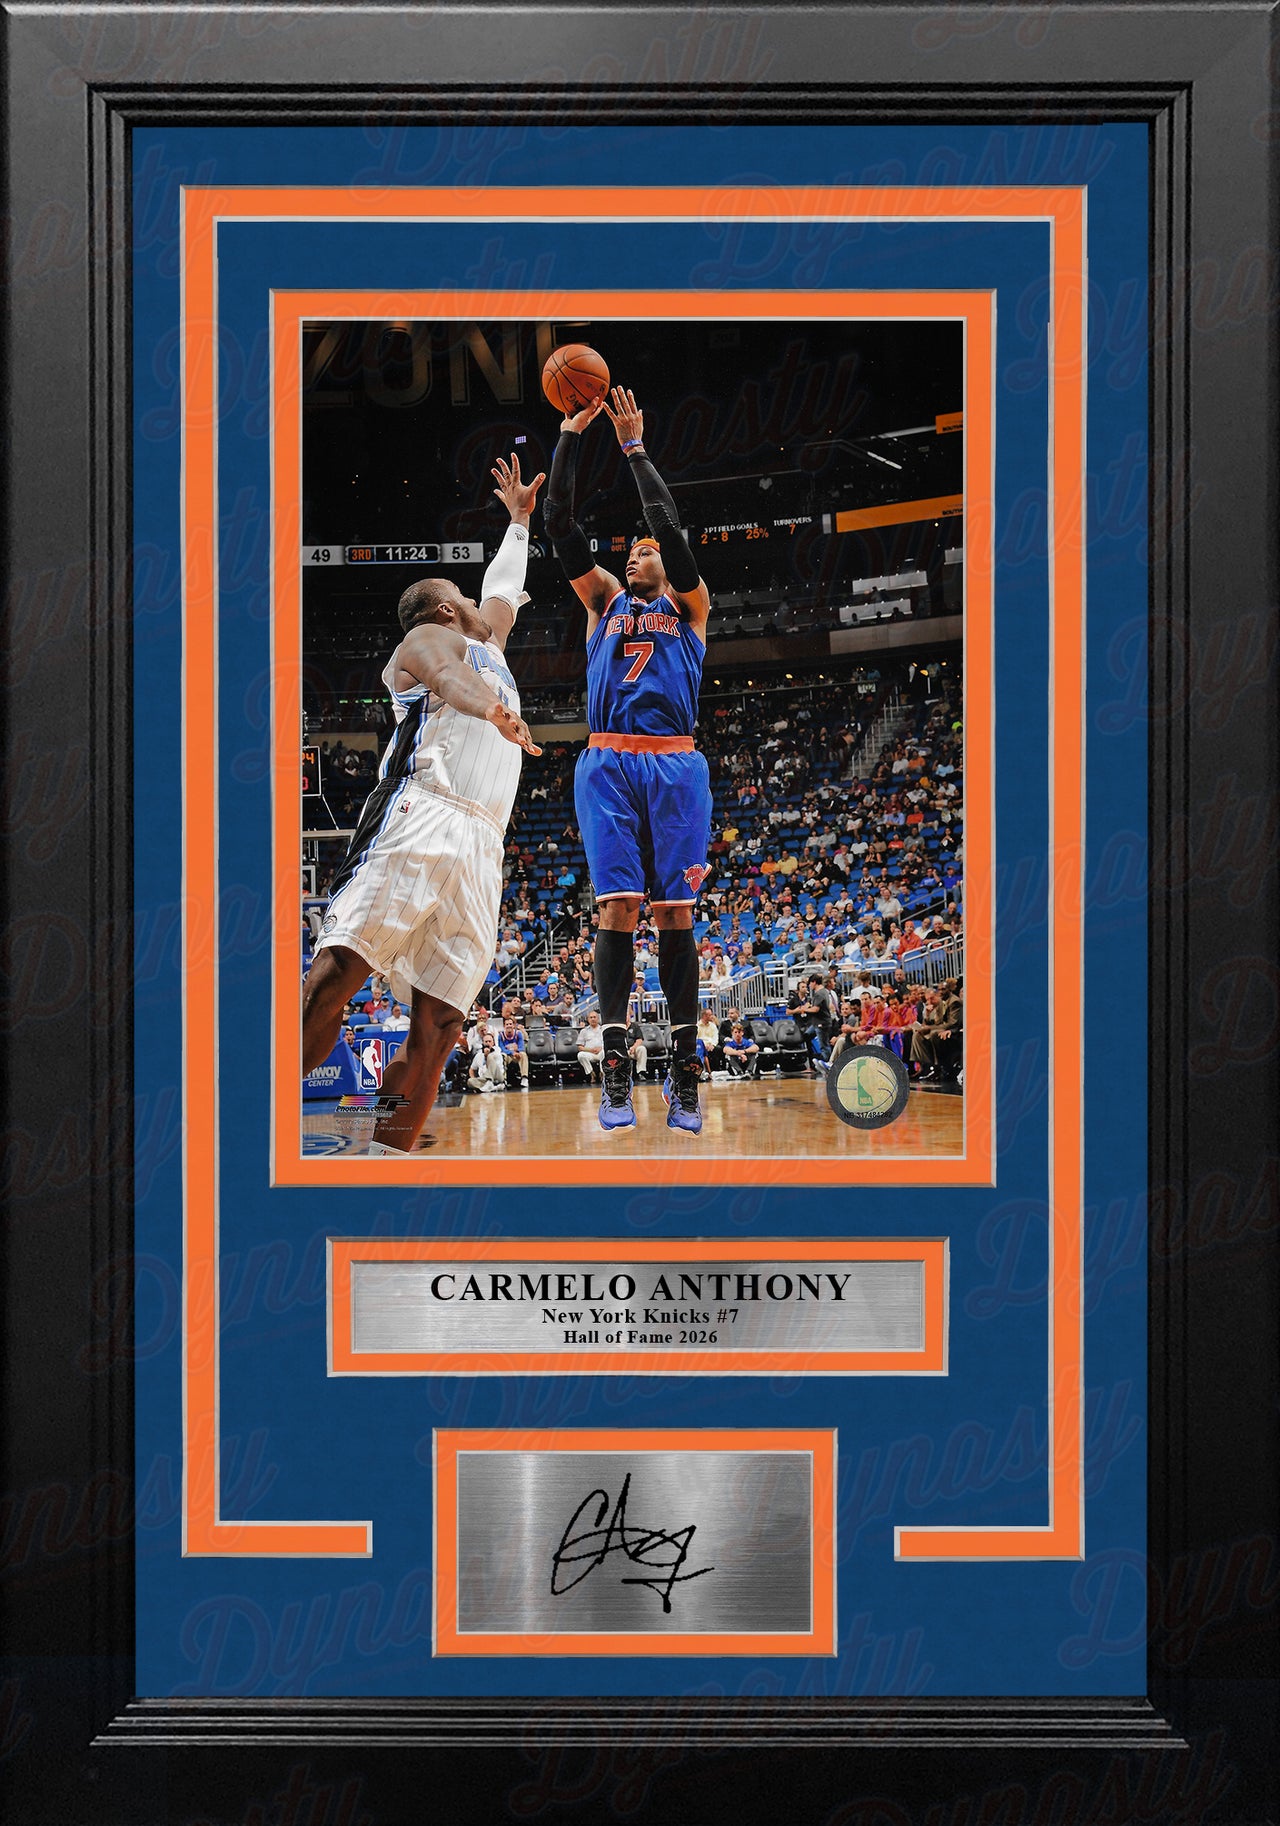 Carmelo Anthony Rookie Debut Signed 8x10 Framed Photo - SWIT Sports